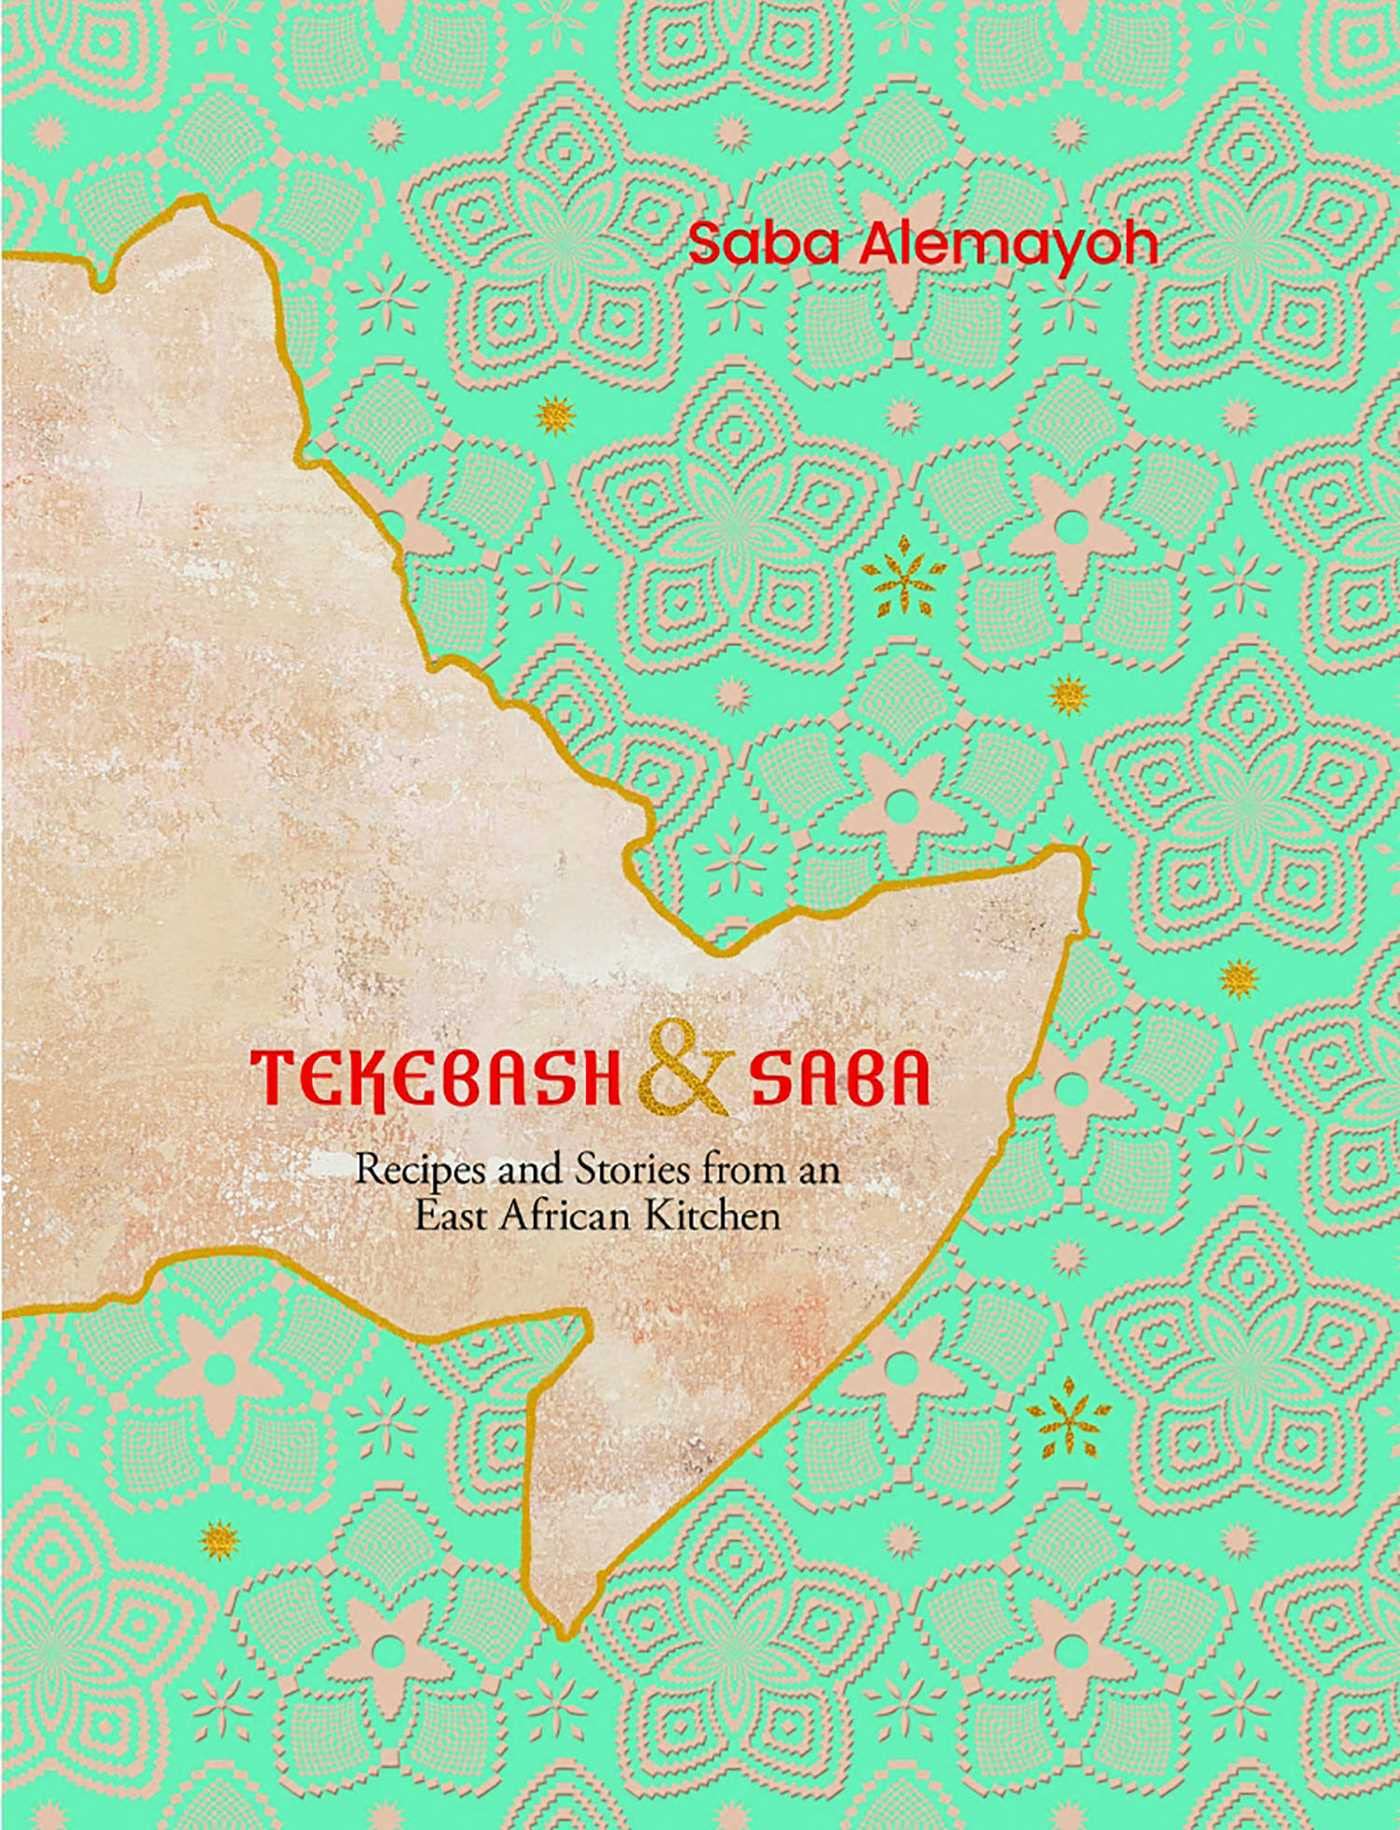 Tekebash and Saba: Recipes and Stories from an East African Kitchen (Saba Alemayoh)